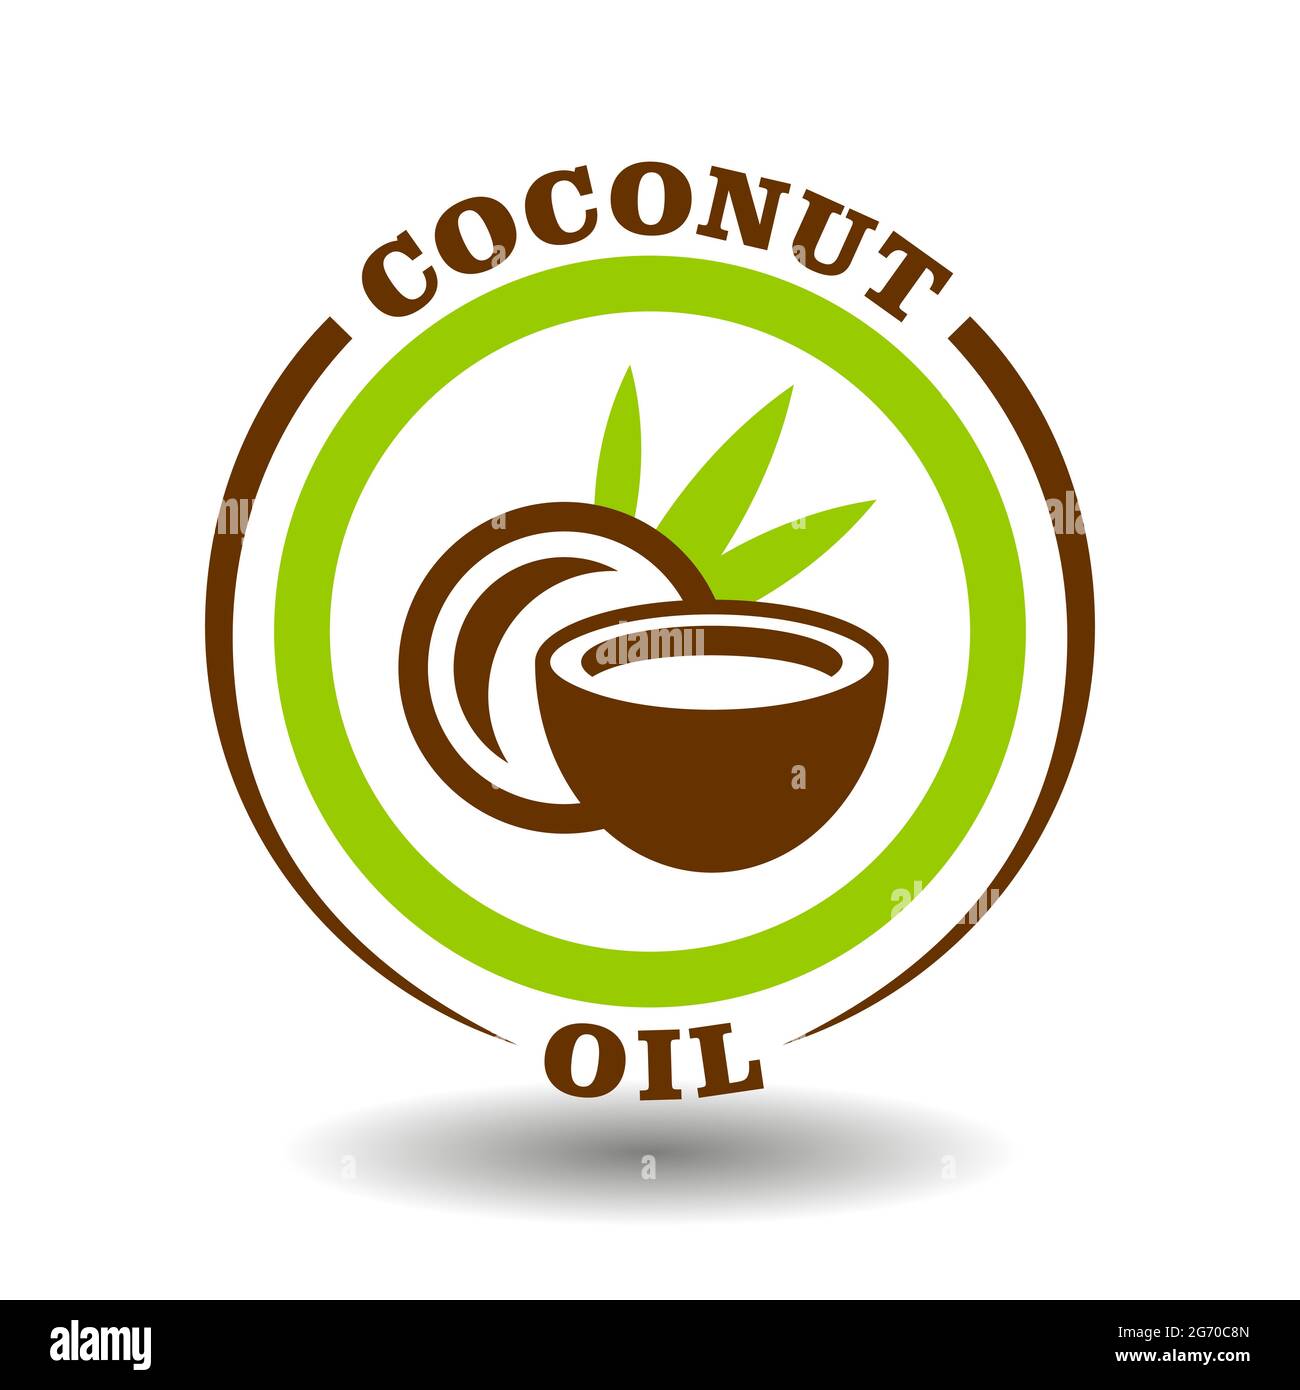 Simple circle logo Coconut oil with round half cut nut shells icon and green palm leaves symbol for labeling product contain natural organic coconut m Stock Vector